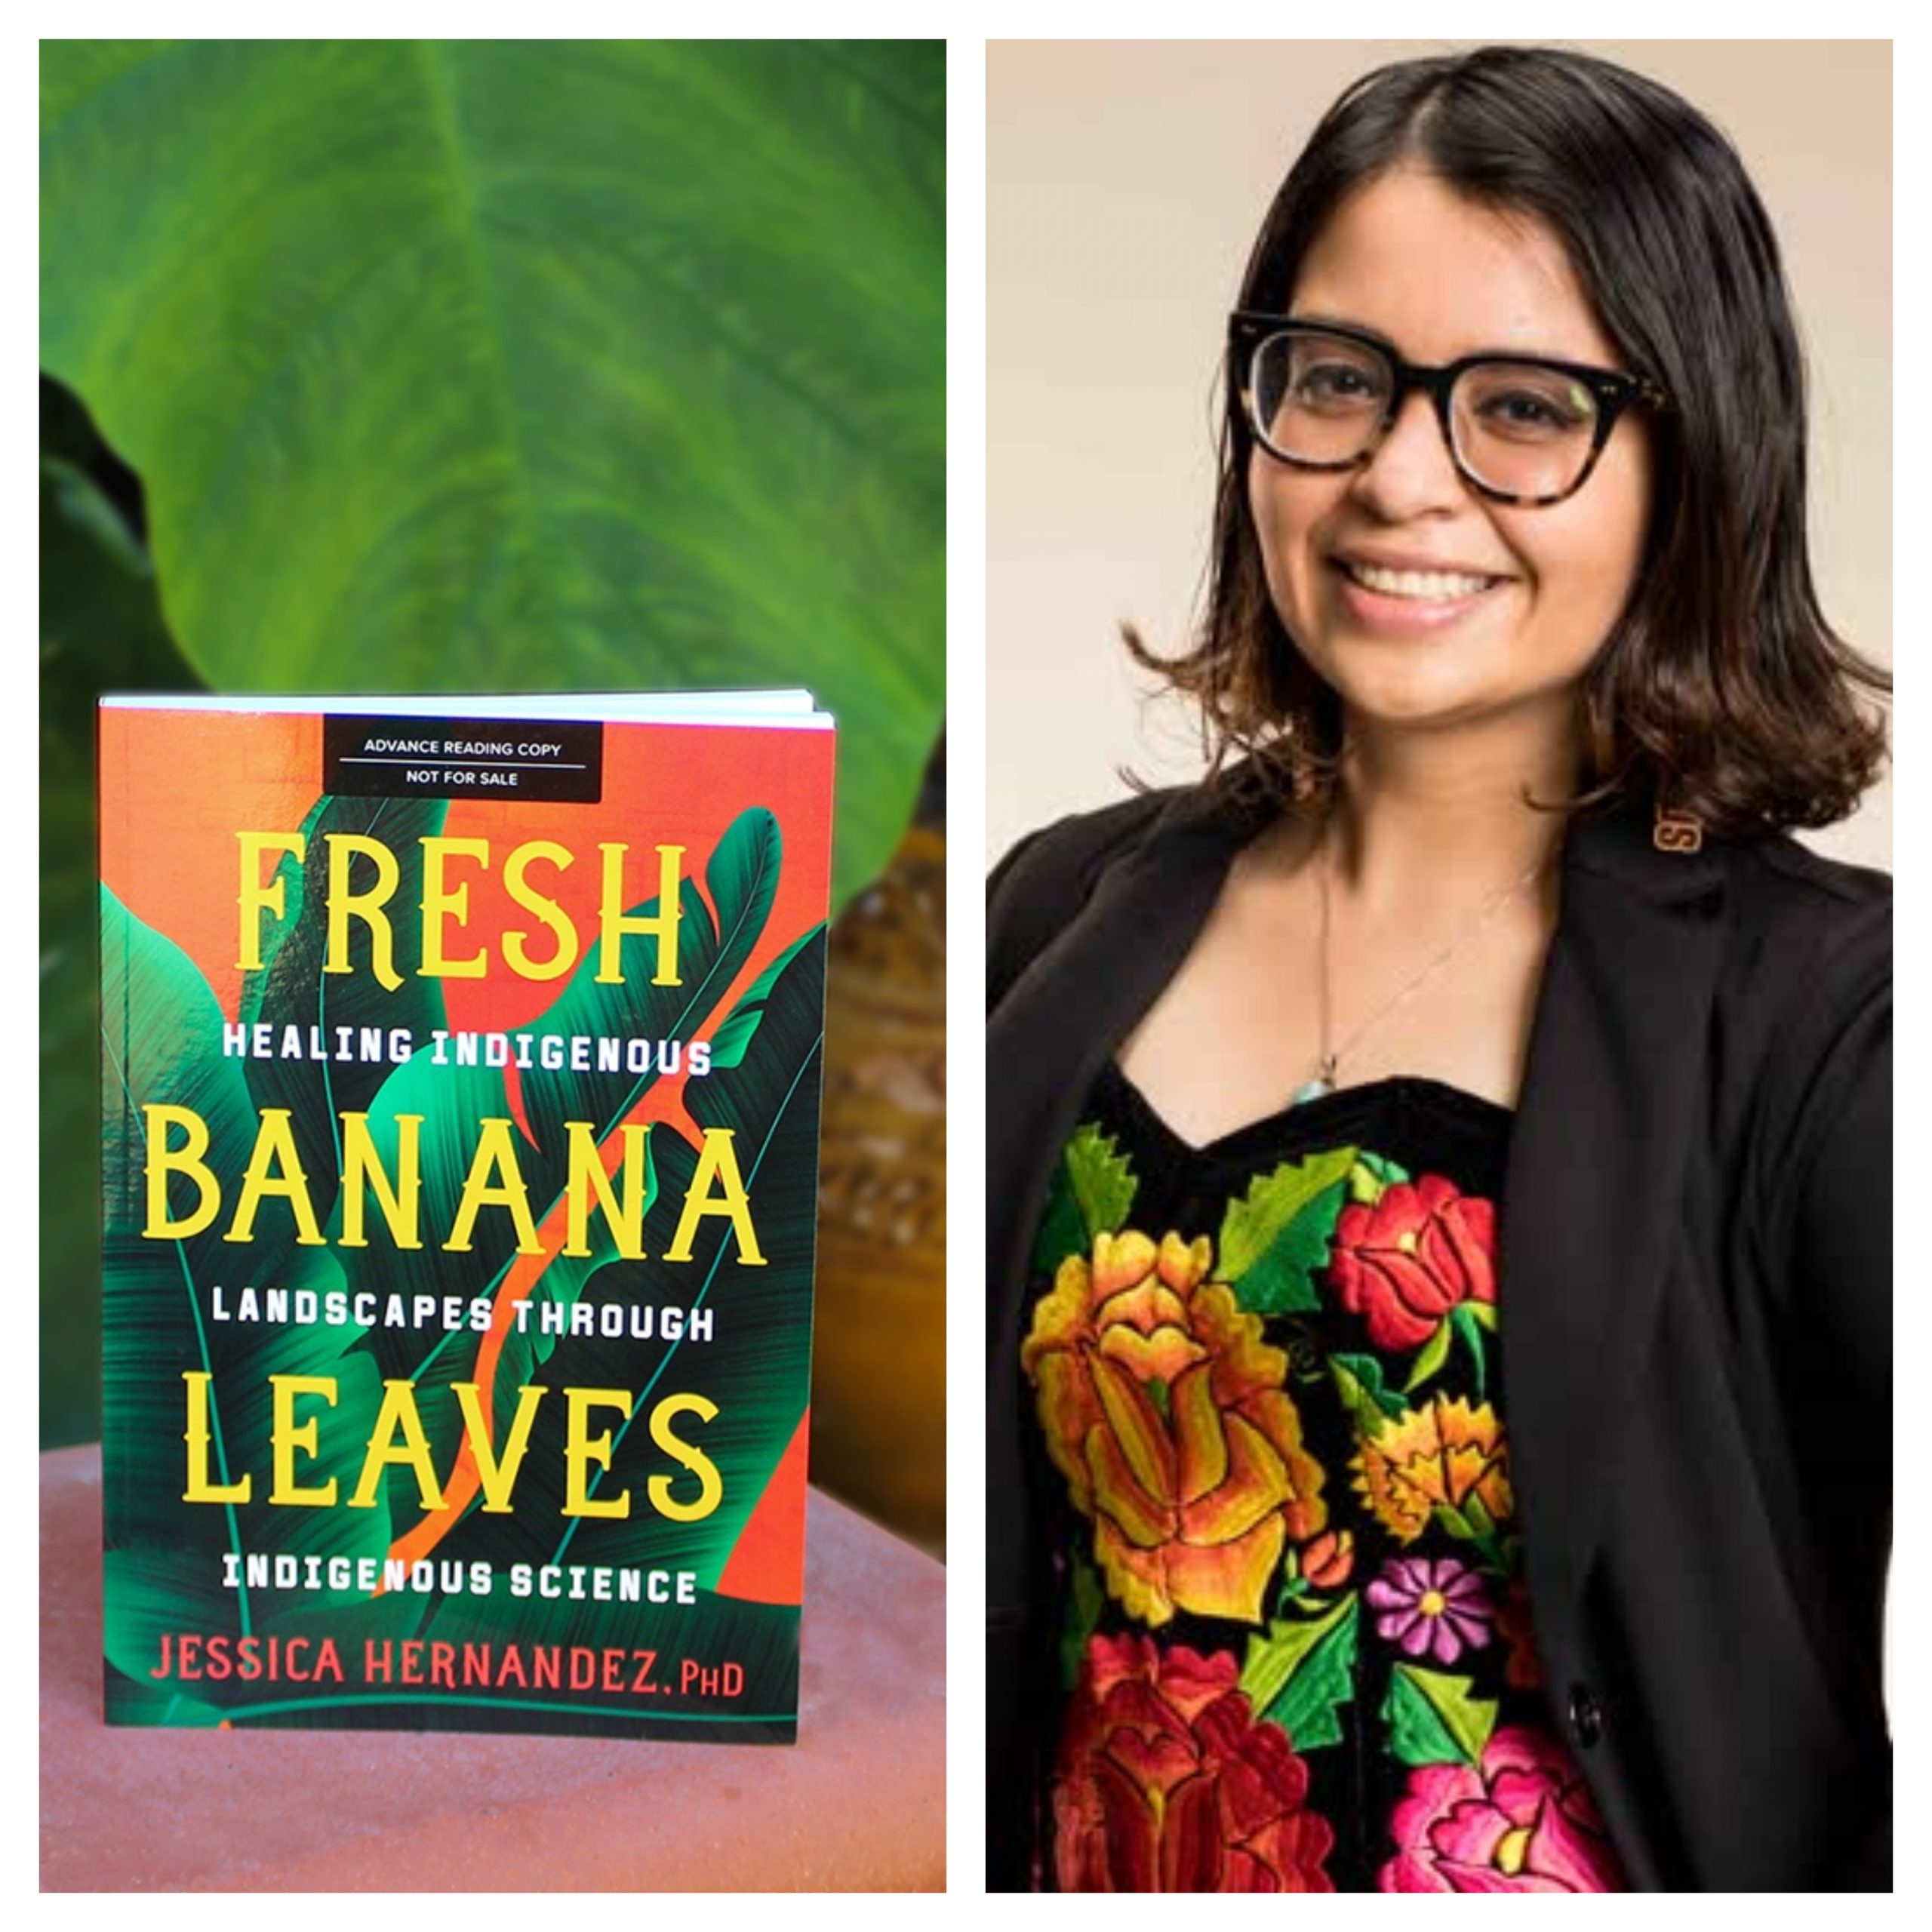 Left: a colorful book with the title Fresh Banana Leaves sits on a pink table with a large flat green leaf behind; right: a smiling woman with round glasses, shoulder-length brown hair, and a black blazer over a dress with large yellow, red, and purple flowers